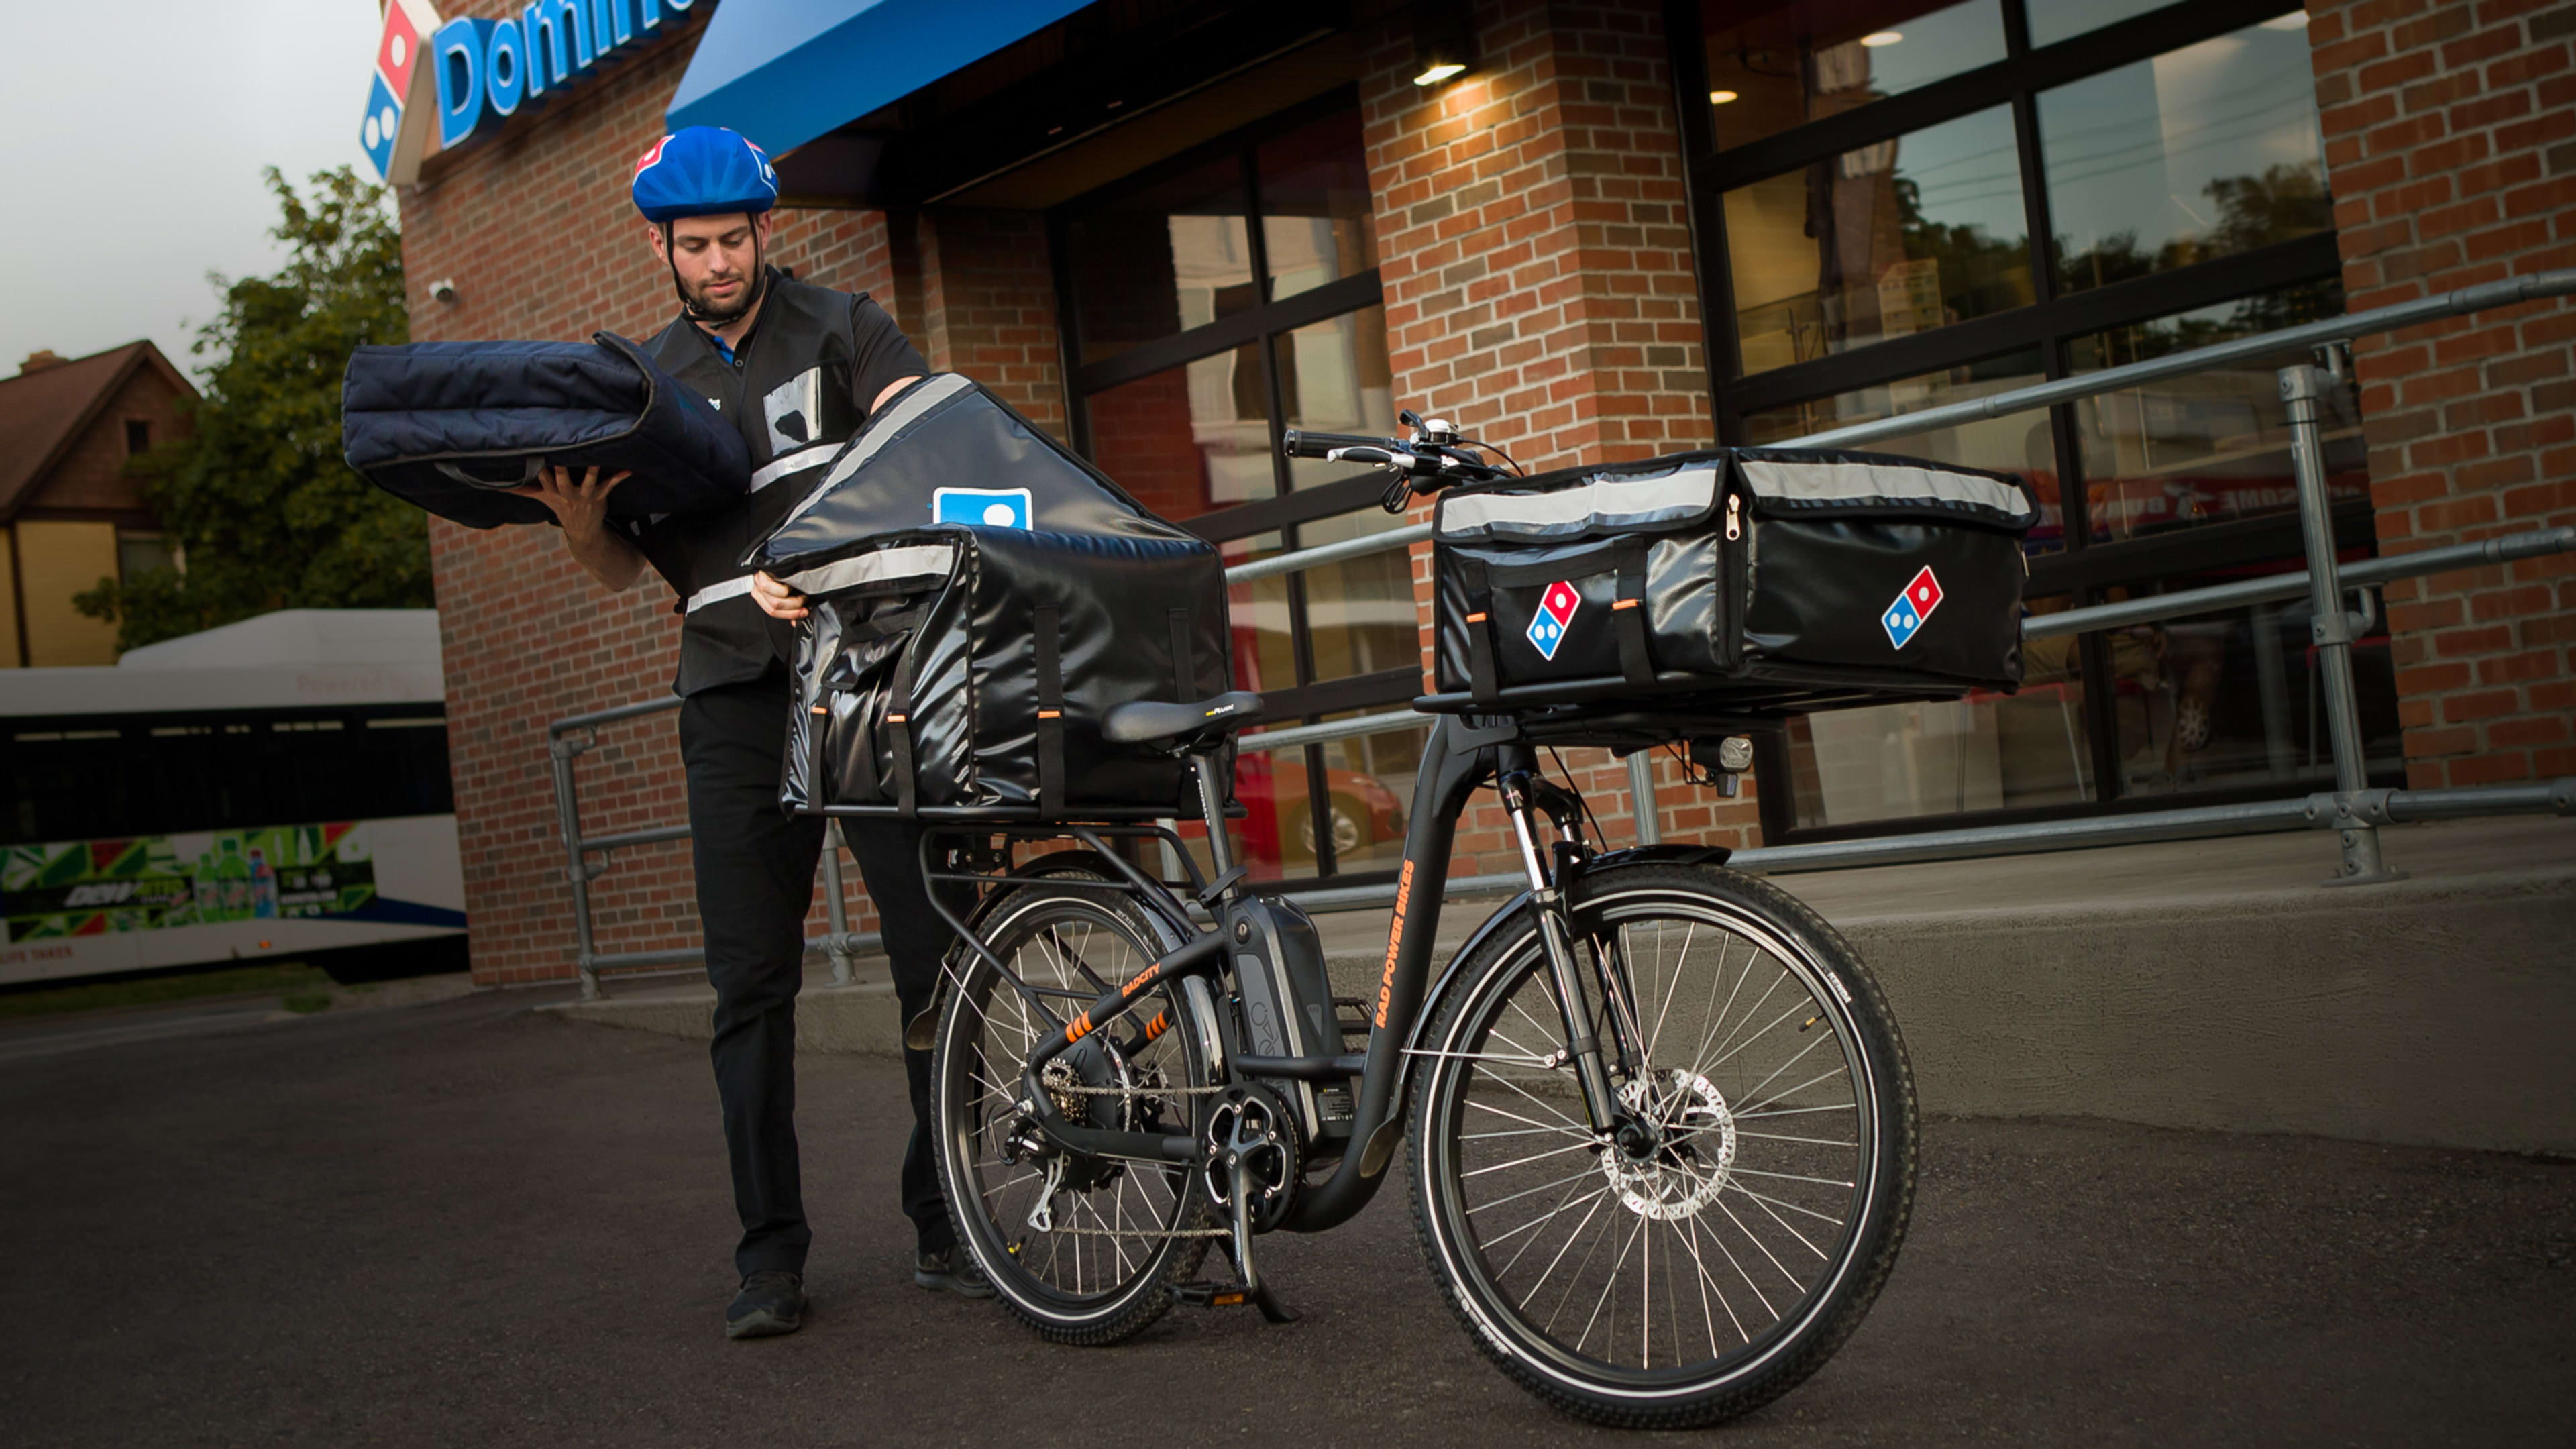 The Domino’s delivery of the future will arrive by electric bike